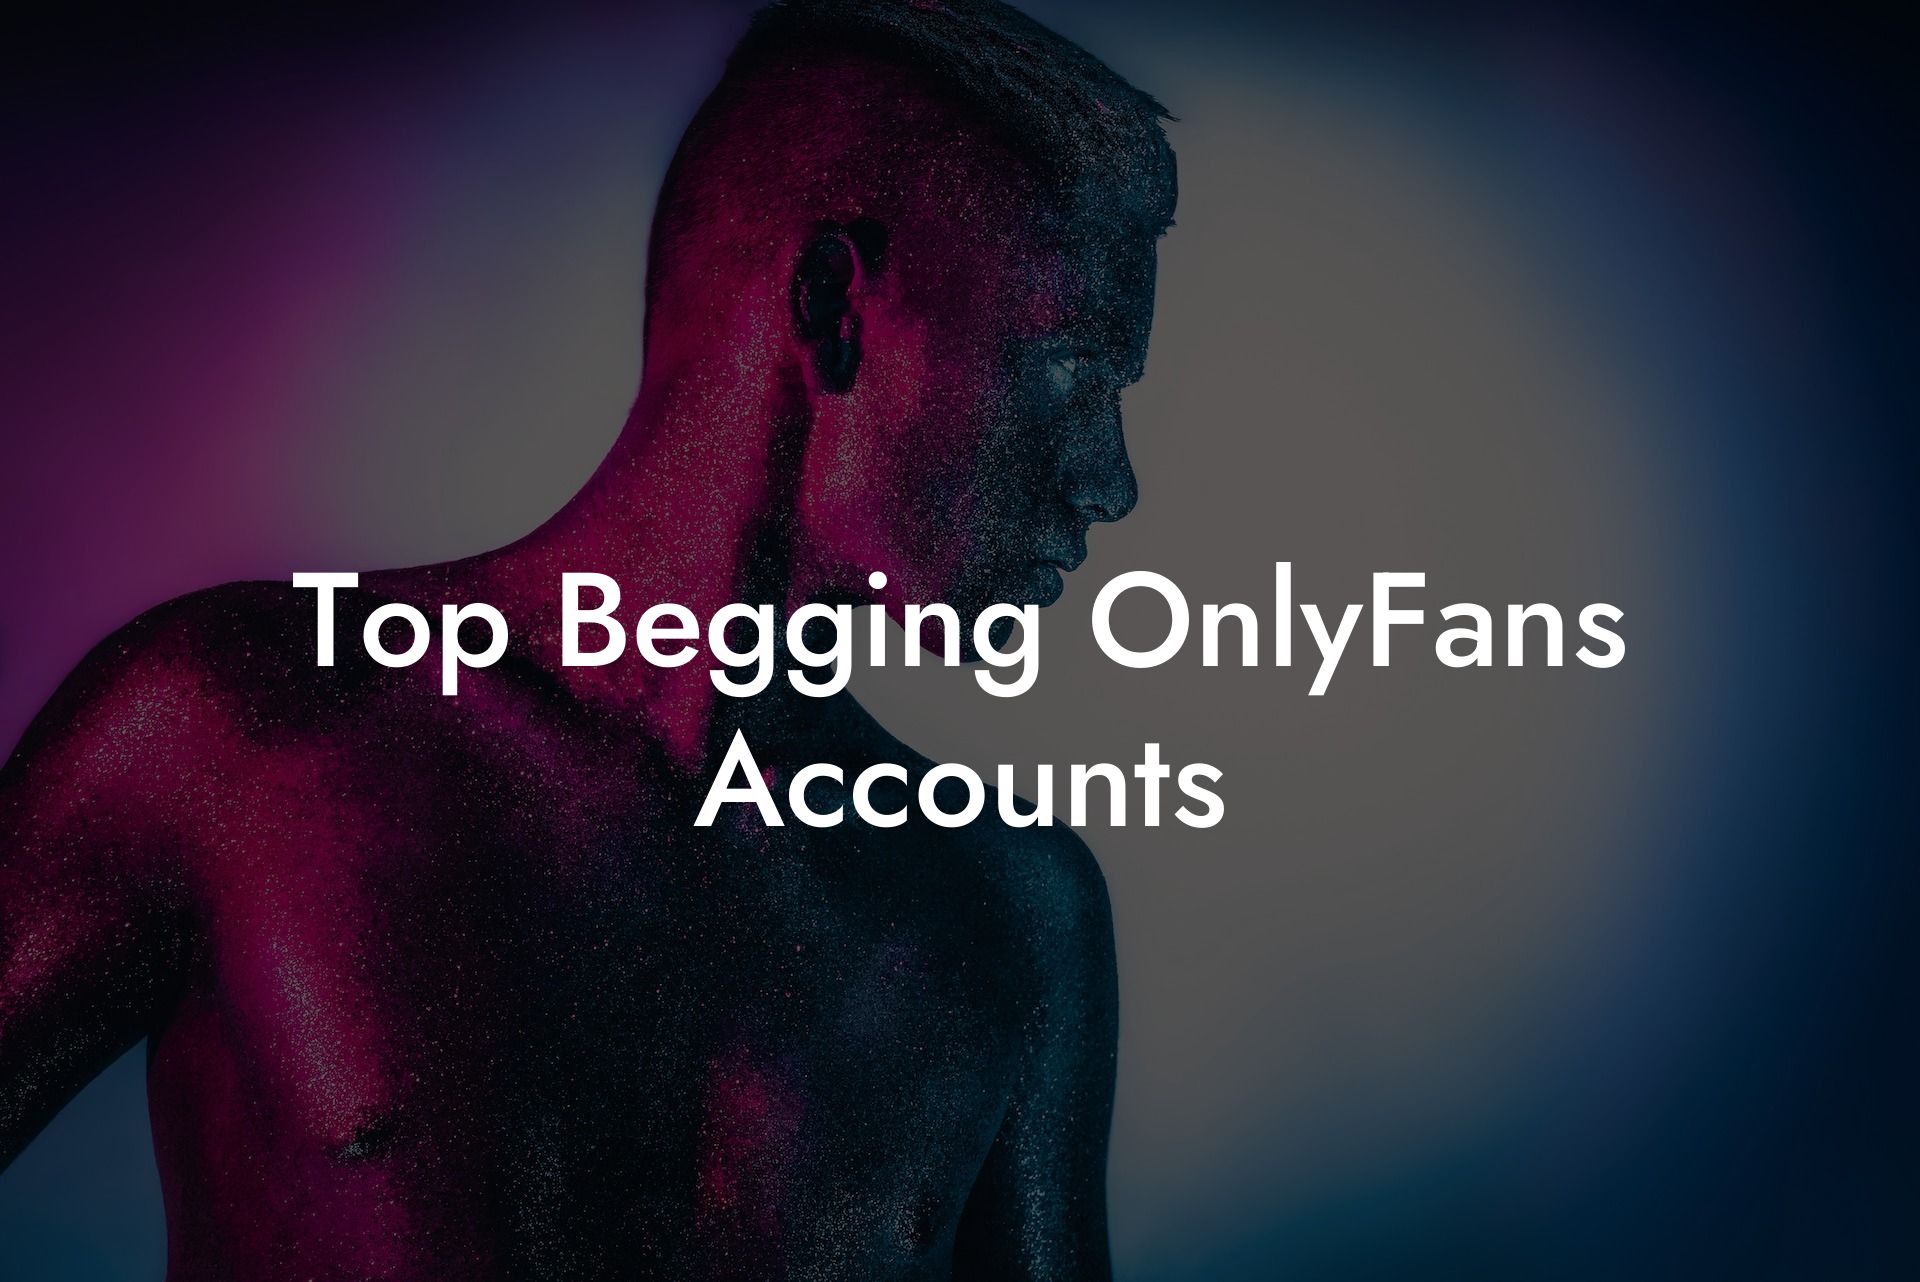 Top Begging OnlyFans Accounts